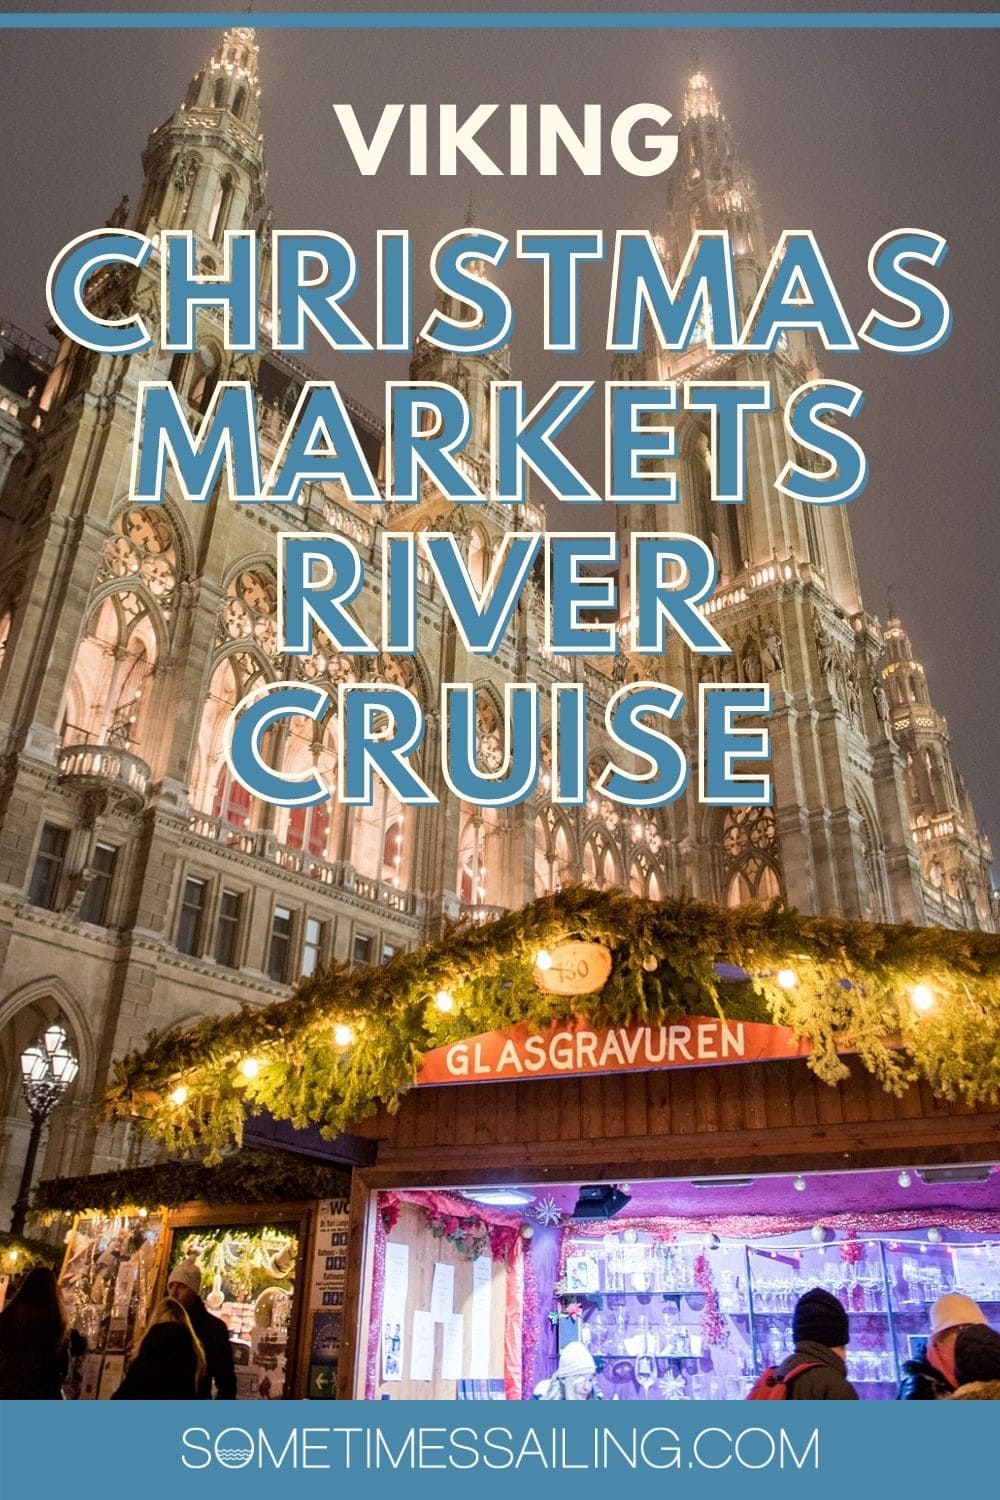 which viking christmas market cruise is best